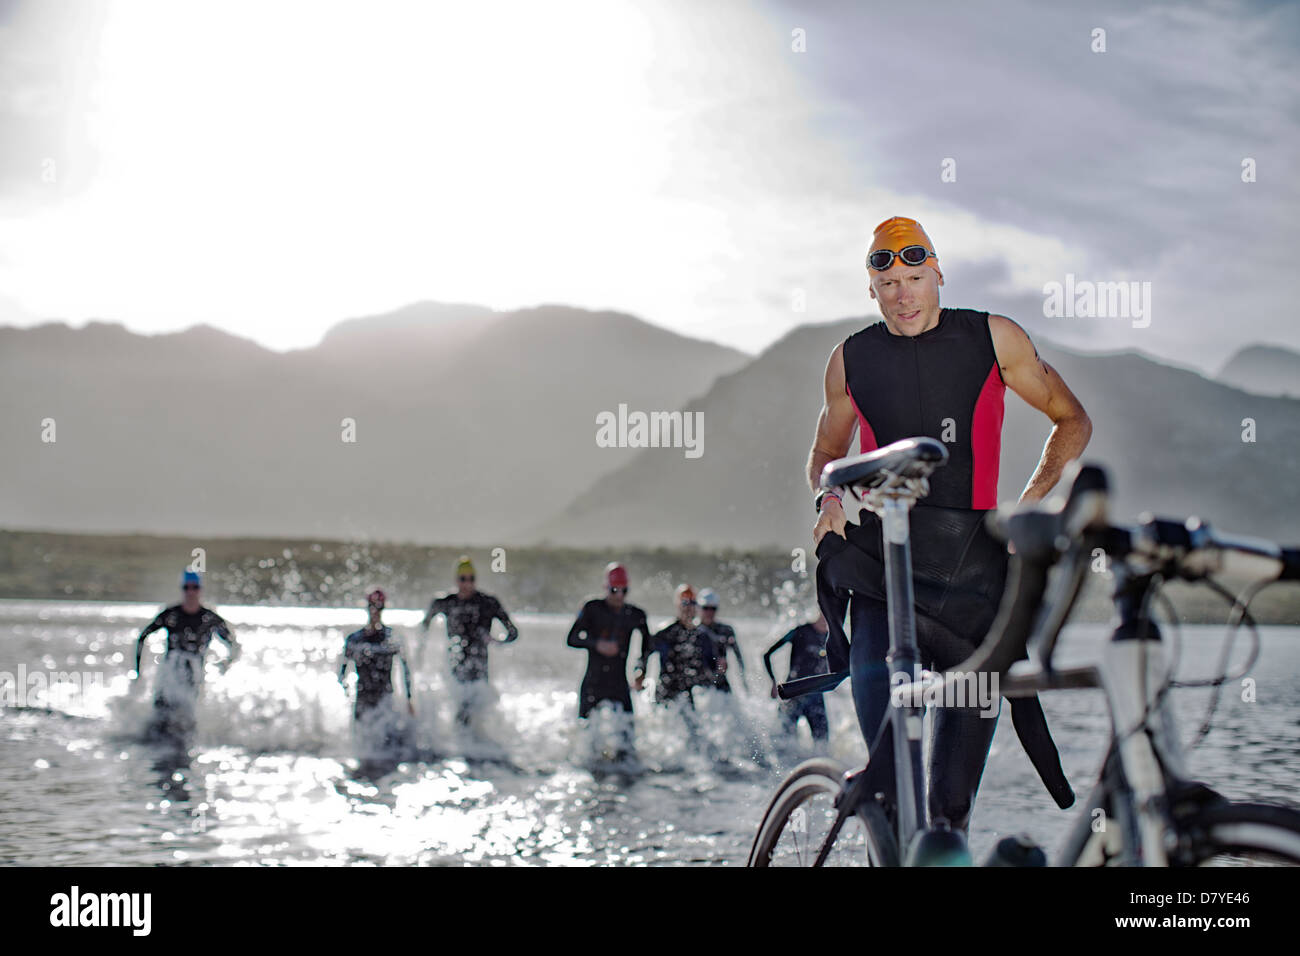 Triathletes emerging from water Stock Photo